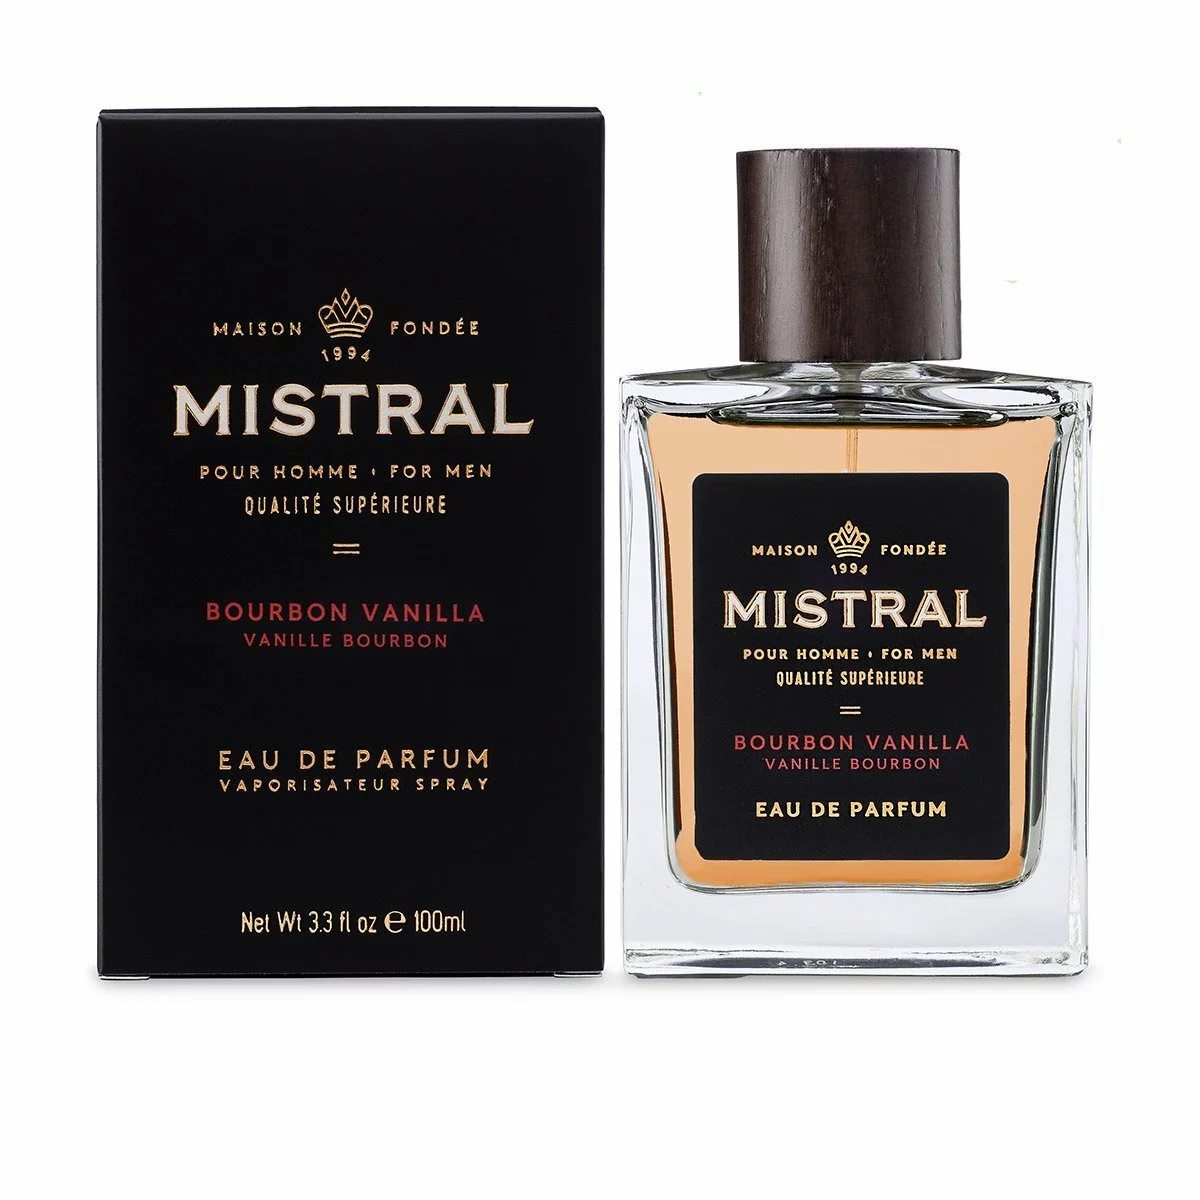 Mistral products